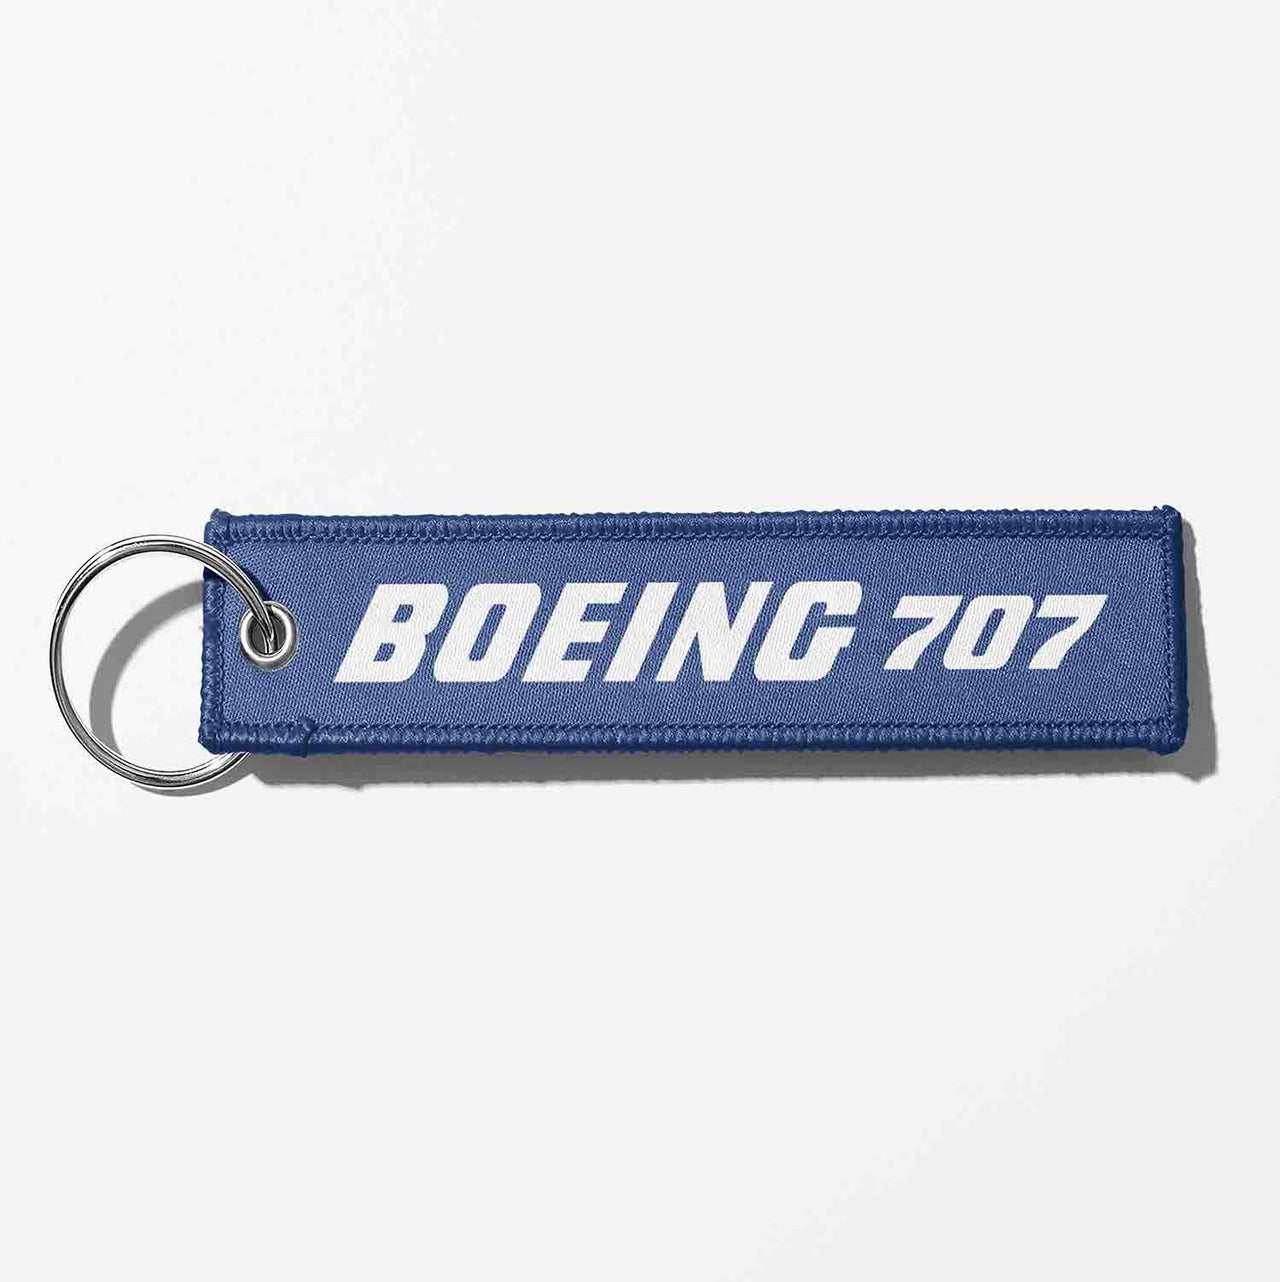 Boeing 707 & Text Designed Key Chains